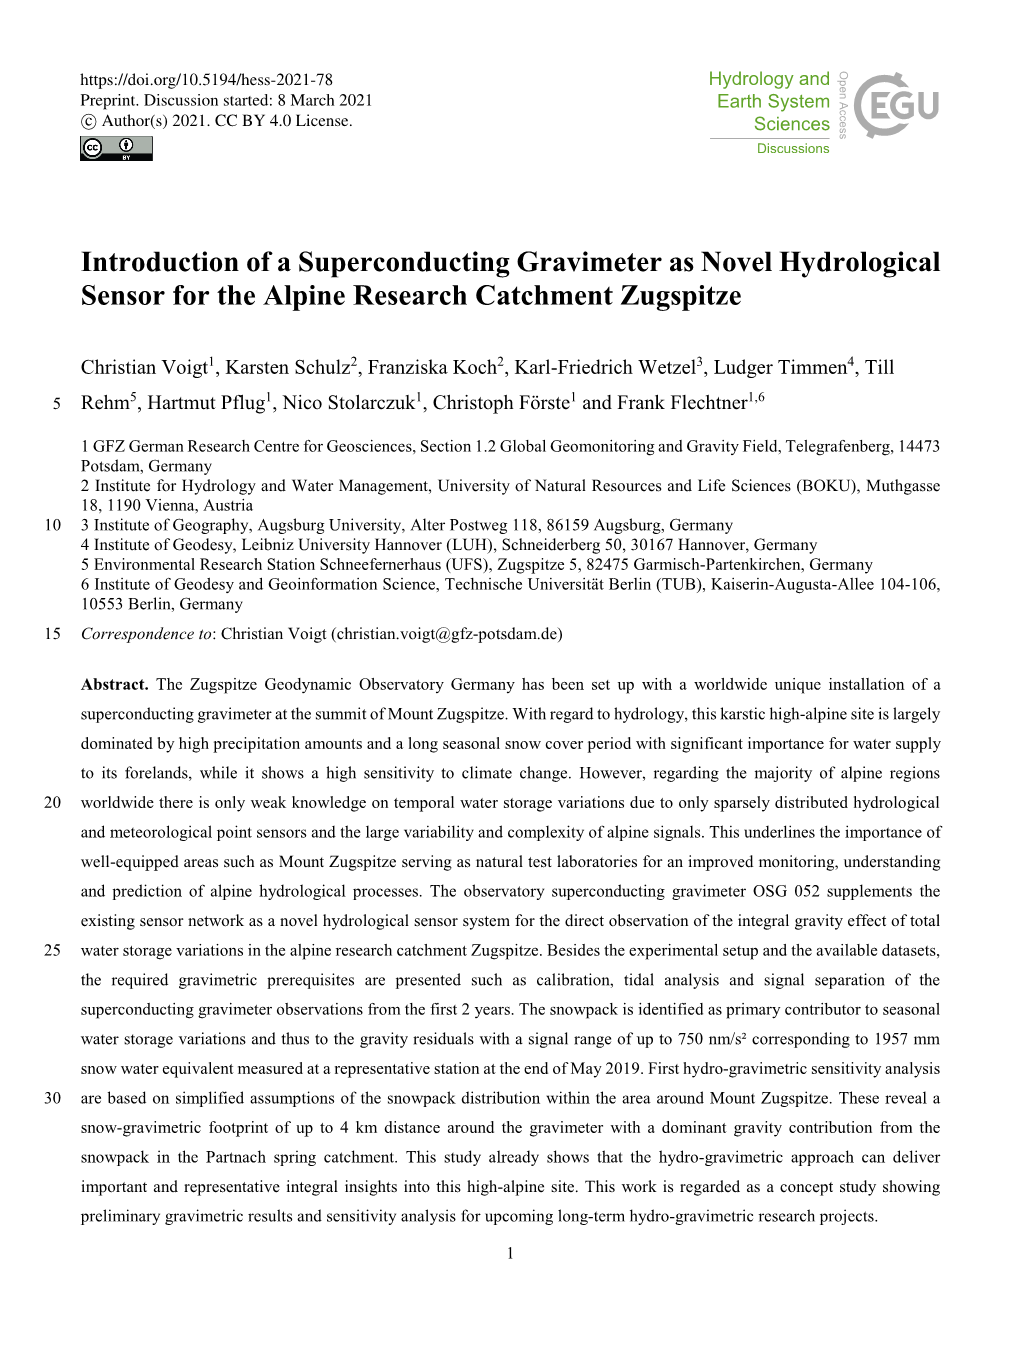 Introduction of a Superconducting Gravimeter As Novel Hydrological Sensor for the Alpine Research Catchment Zugspitze